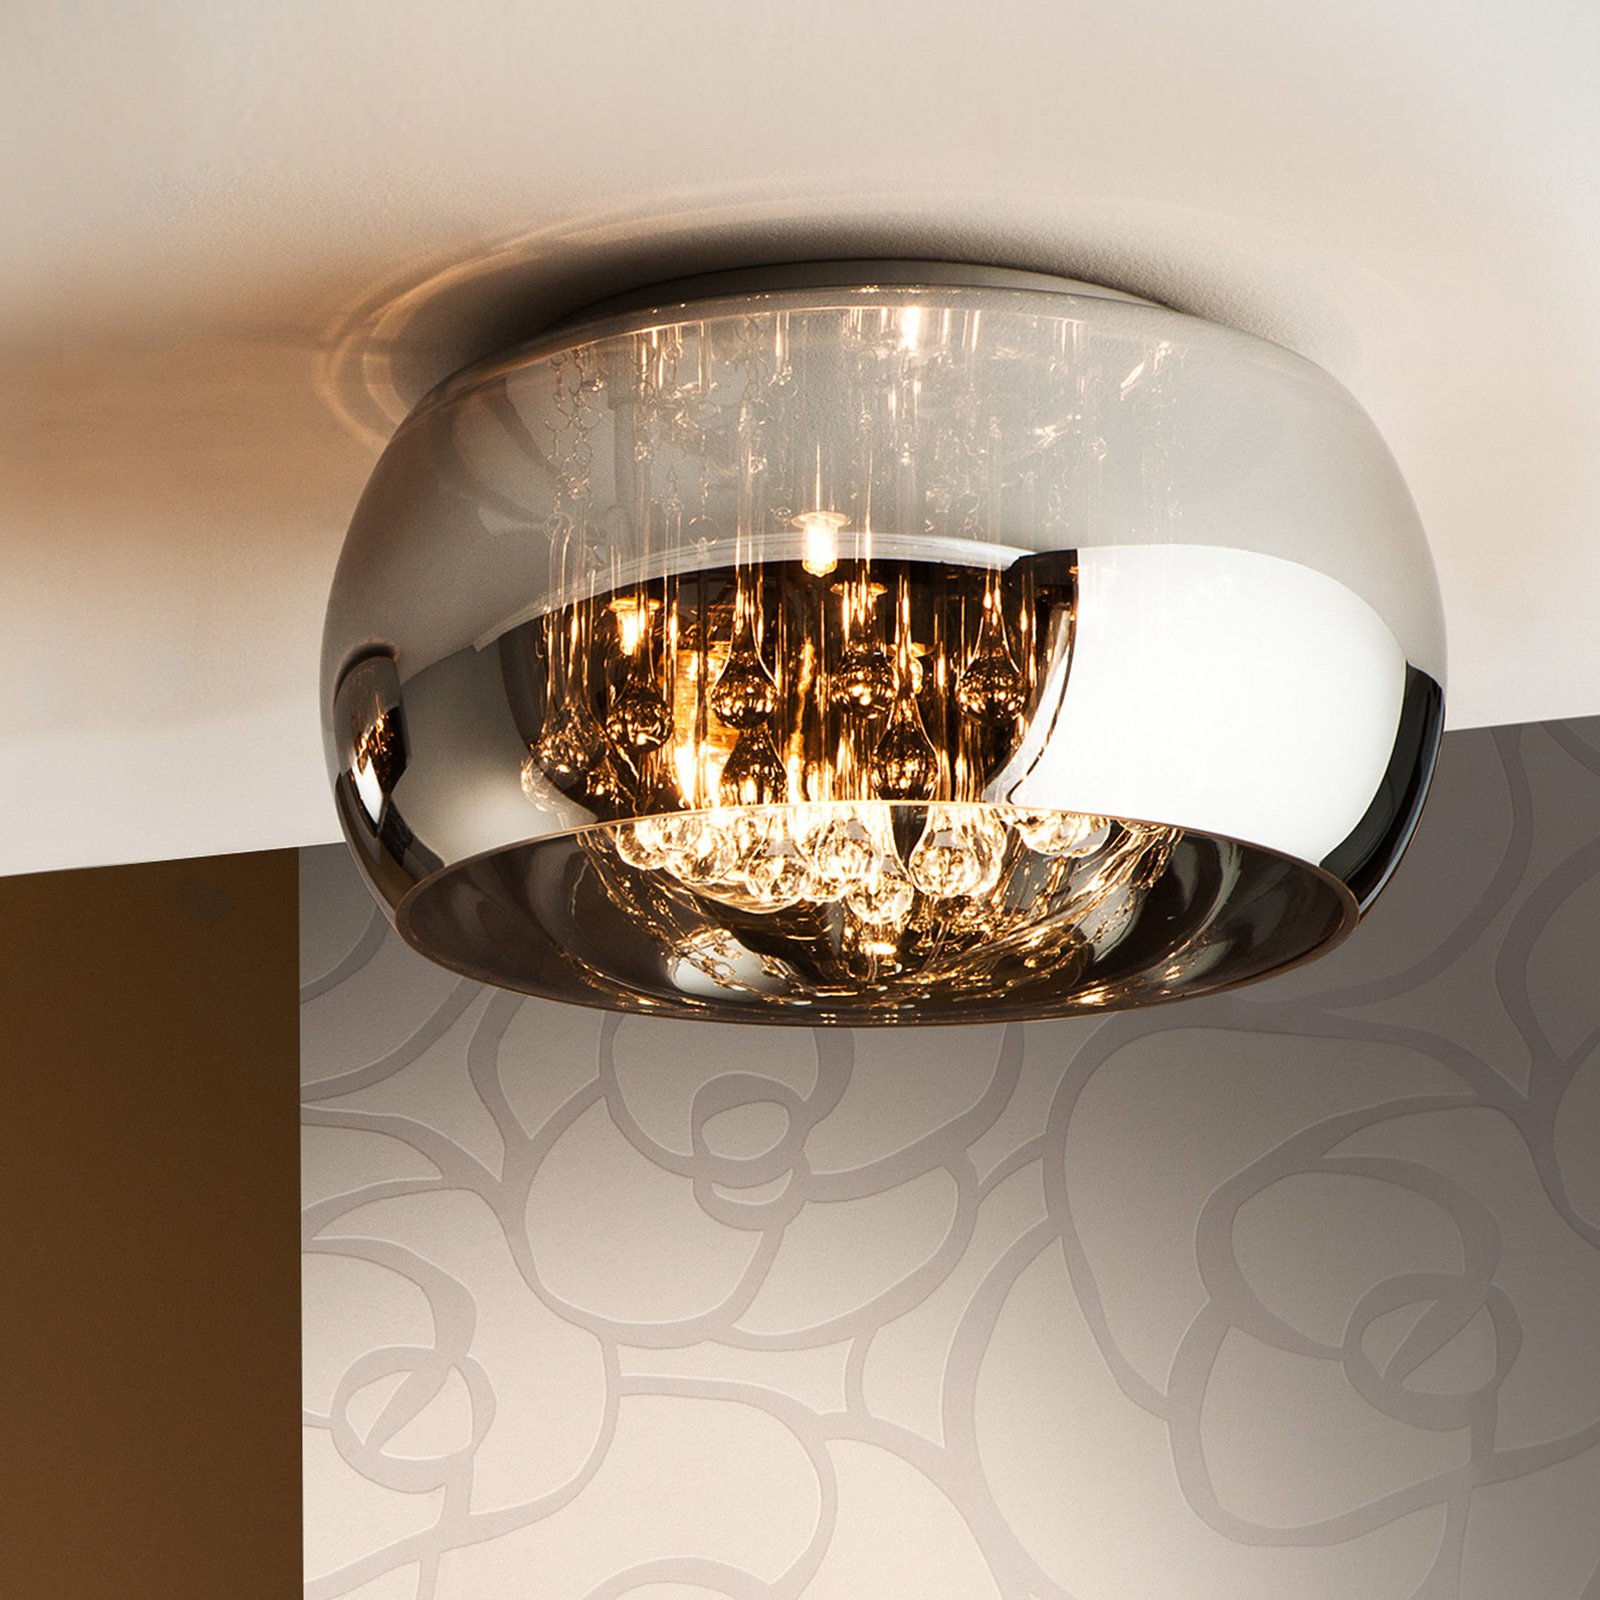 Argos LED ceiling light with crystals, Ø 40 cm